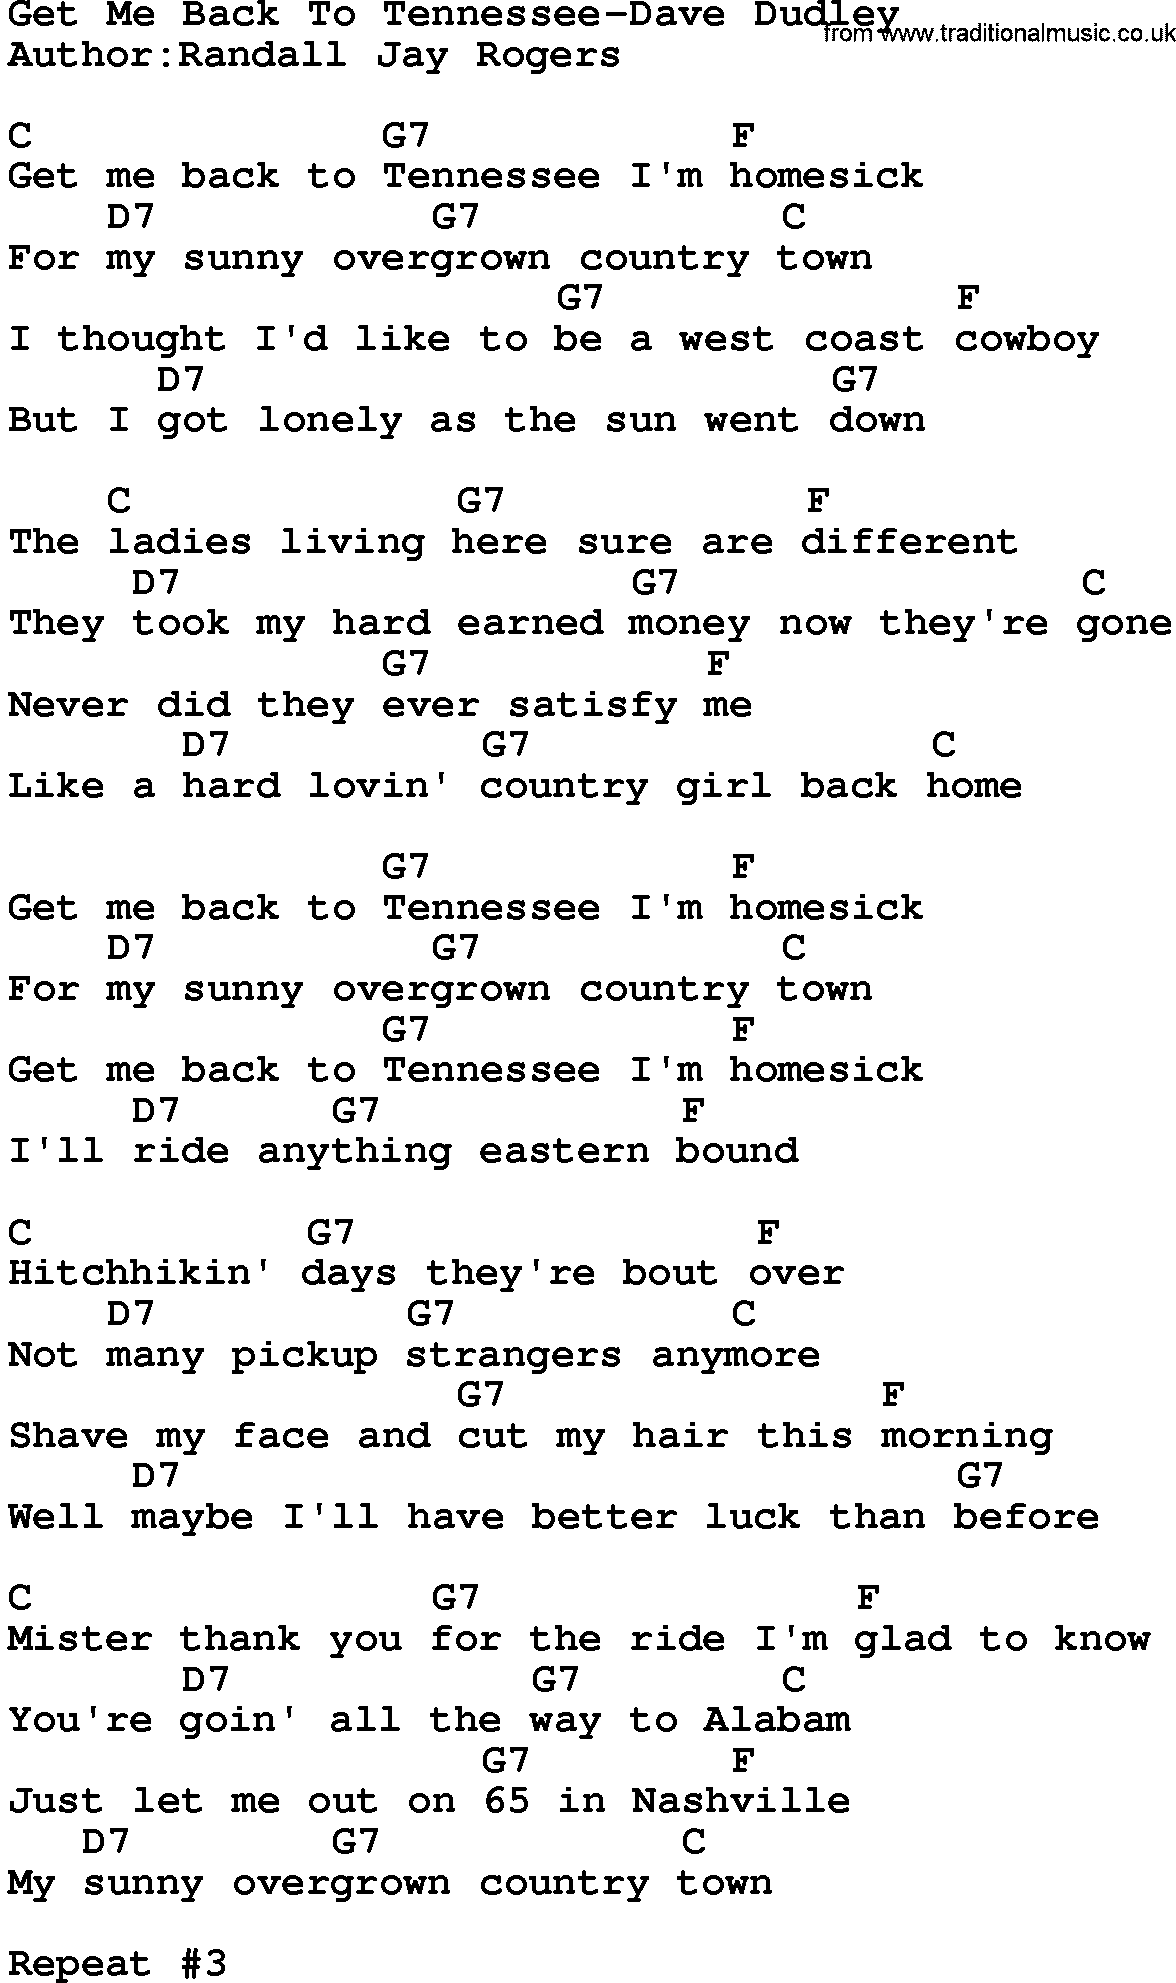 Country music song: Get Me Back To Tennessee-Dave Dudley lyrics and chords